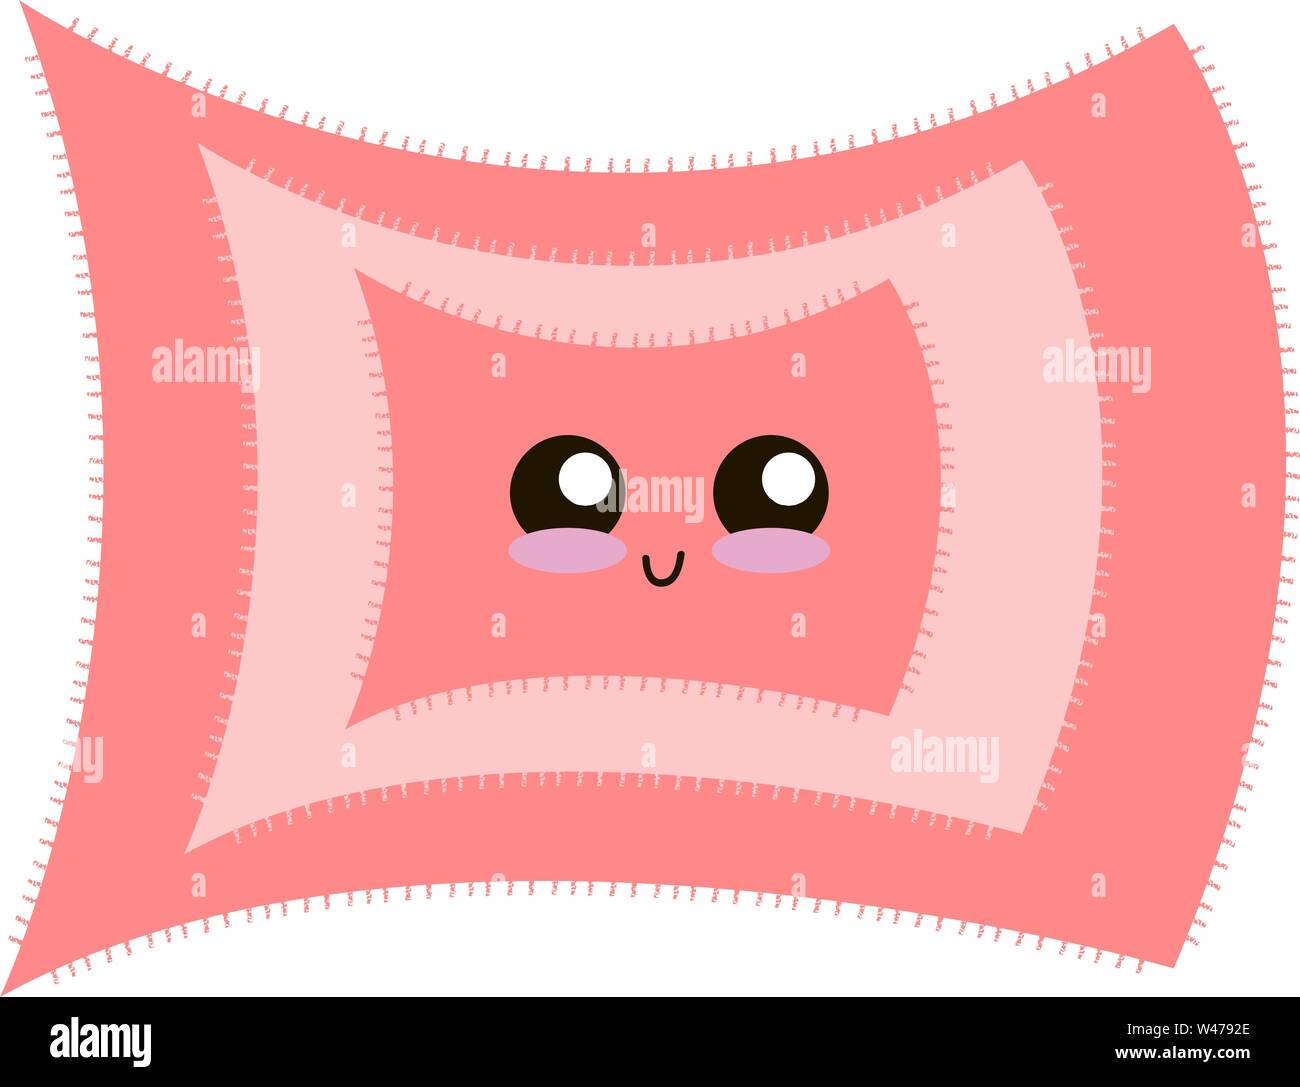 Cute pink carpet, illustration, vector on white background. Stock Vector